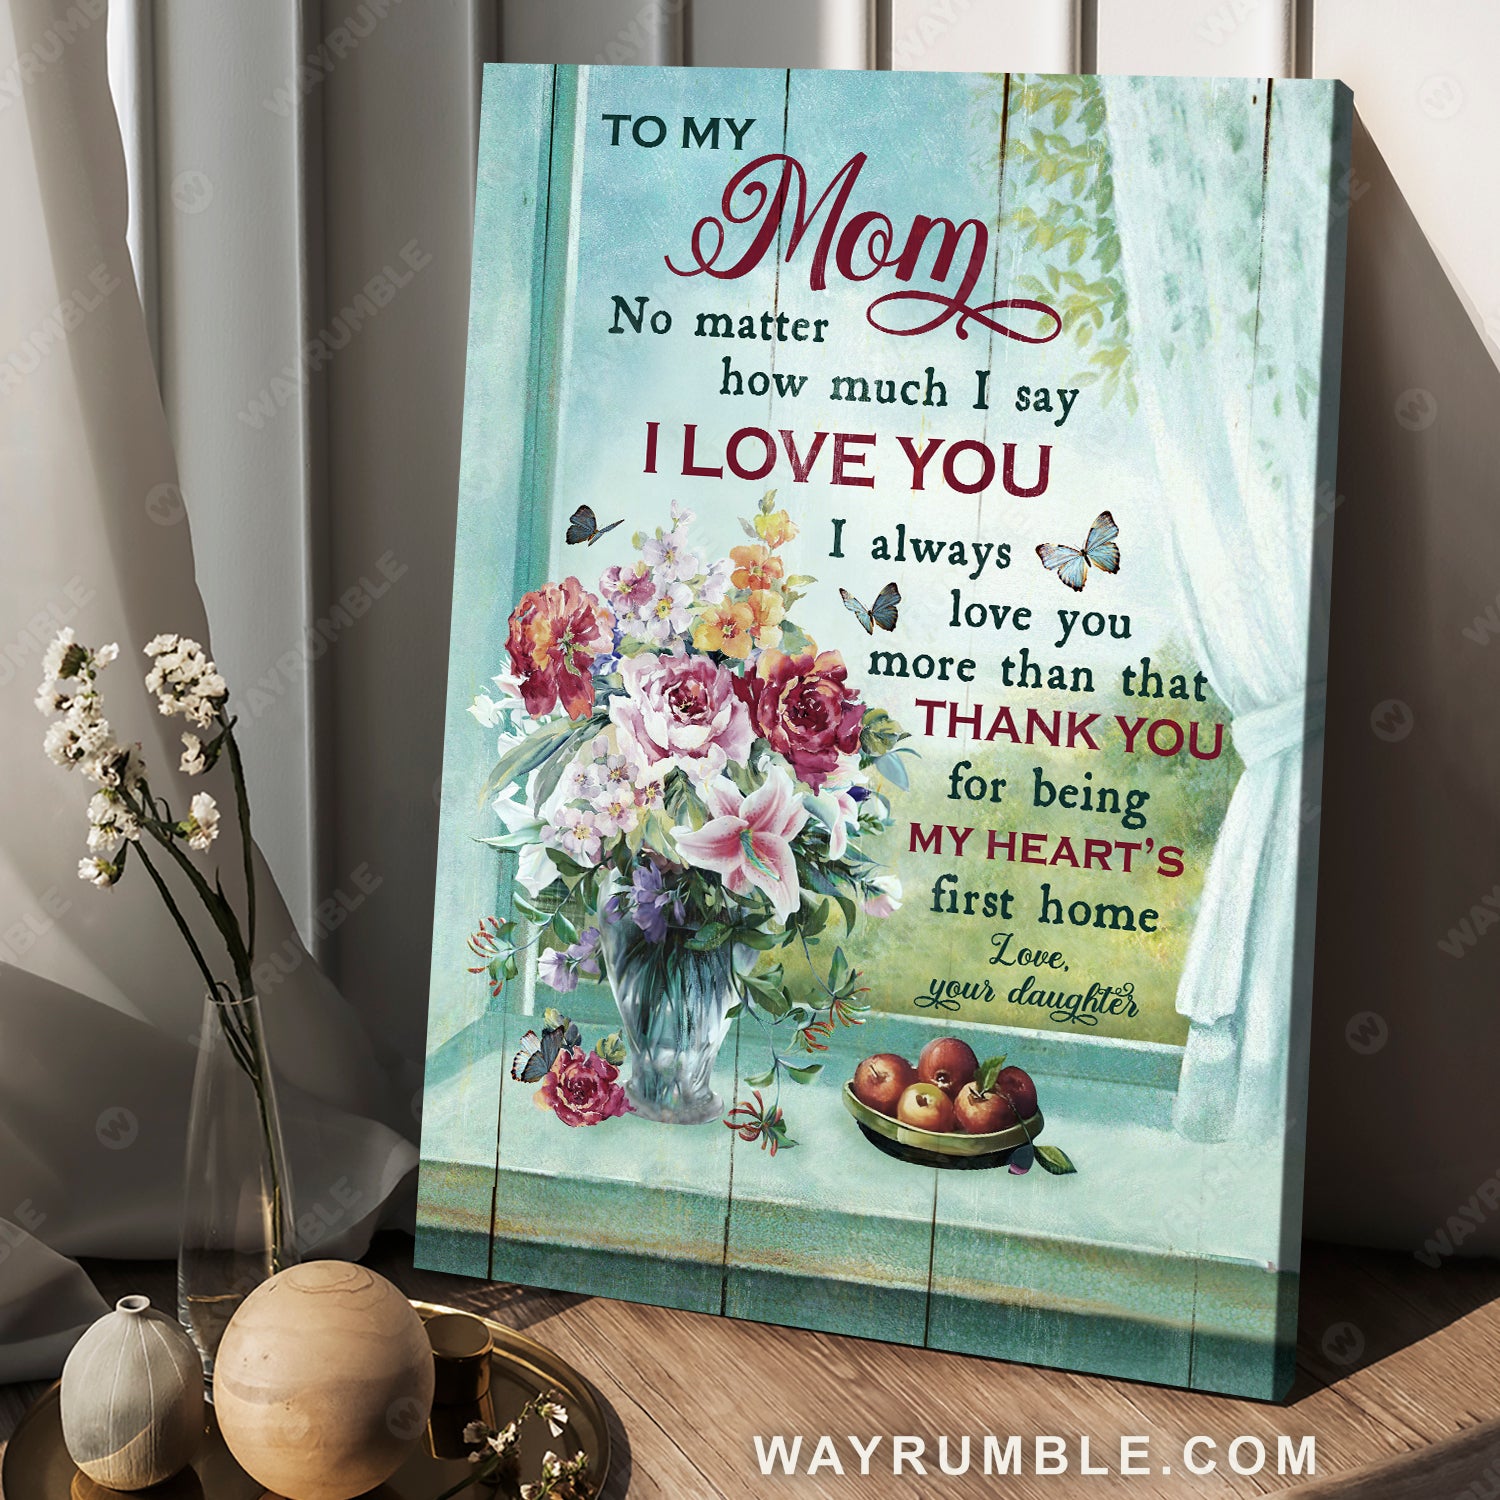 Daughter to mom, Vintage window, Flower vase, Thank you for being my heart's first home - Family Portrait Canvas Prints, Wall Art